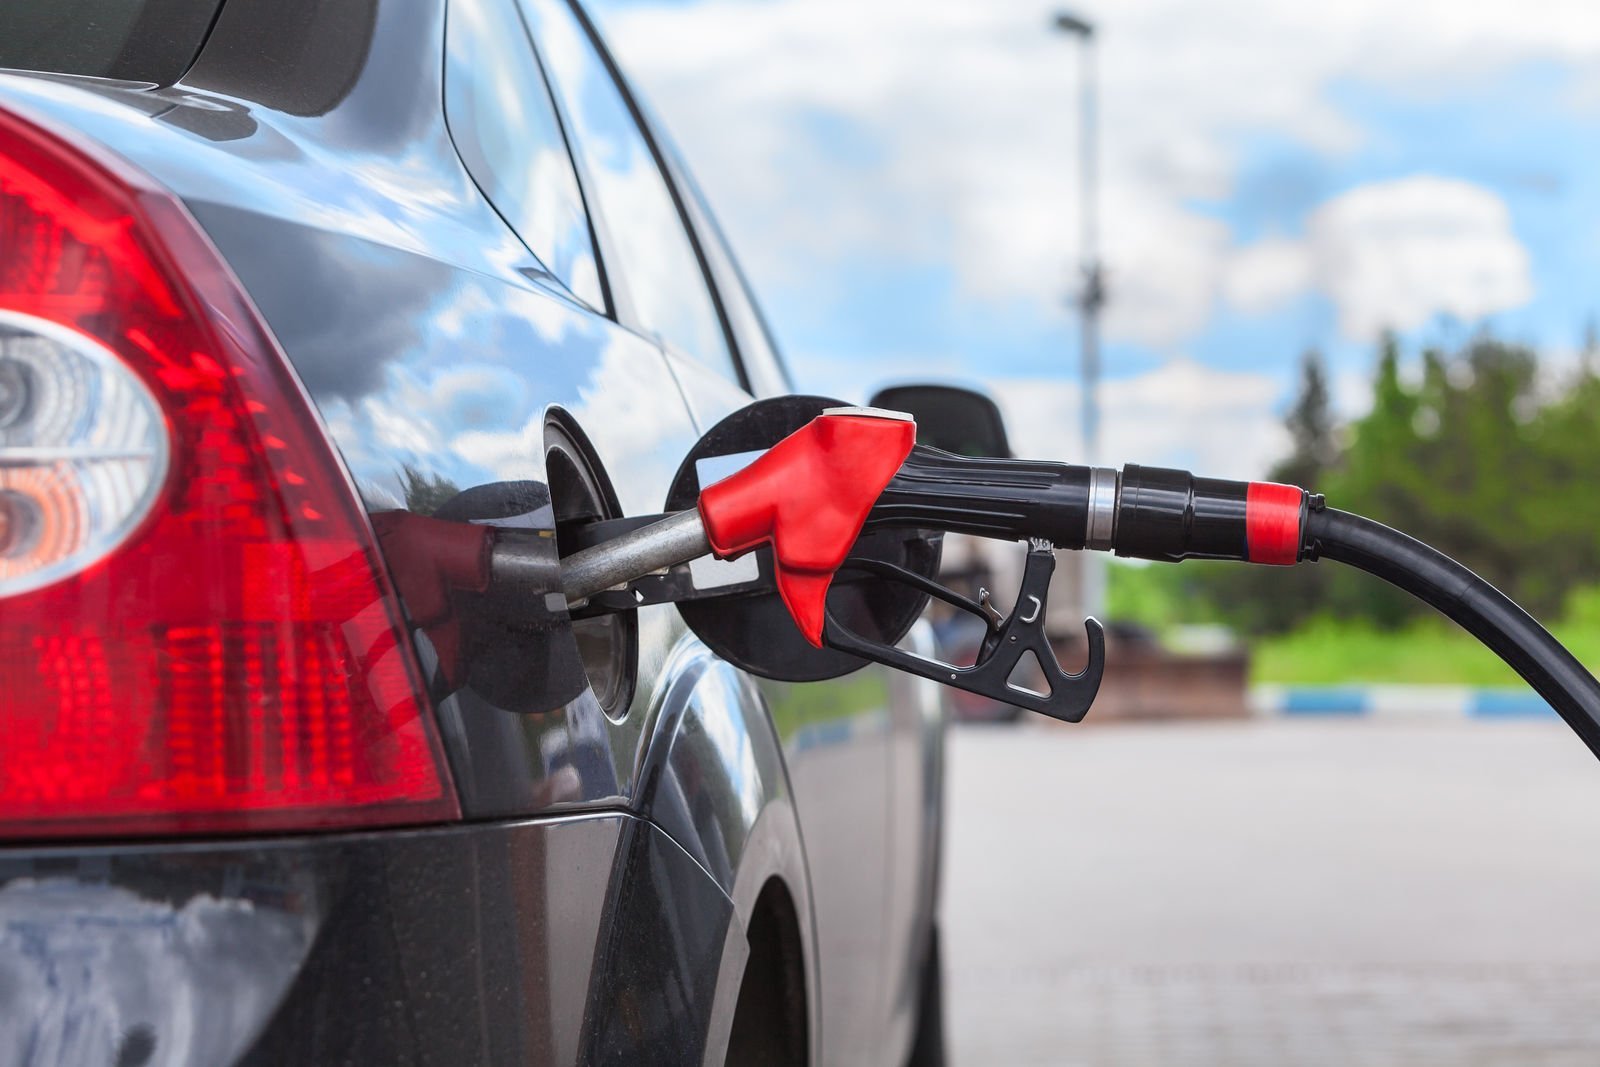 Is putting the wrong fuel in a car covered by insurance?